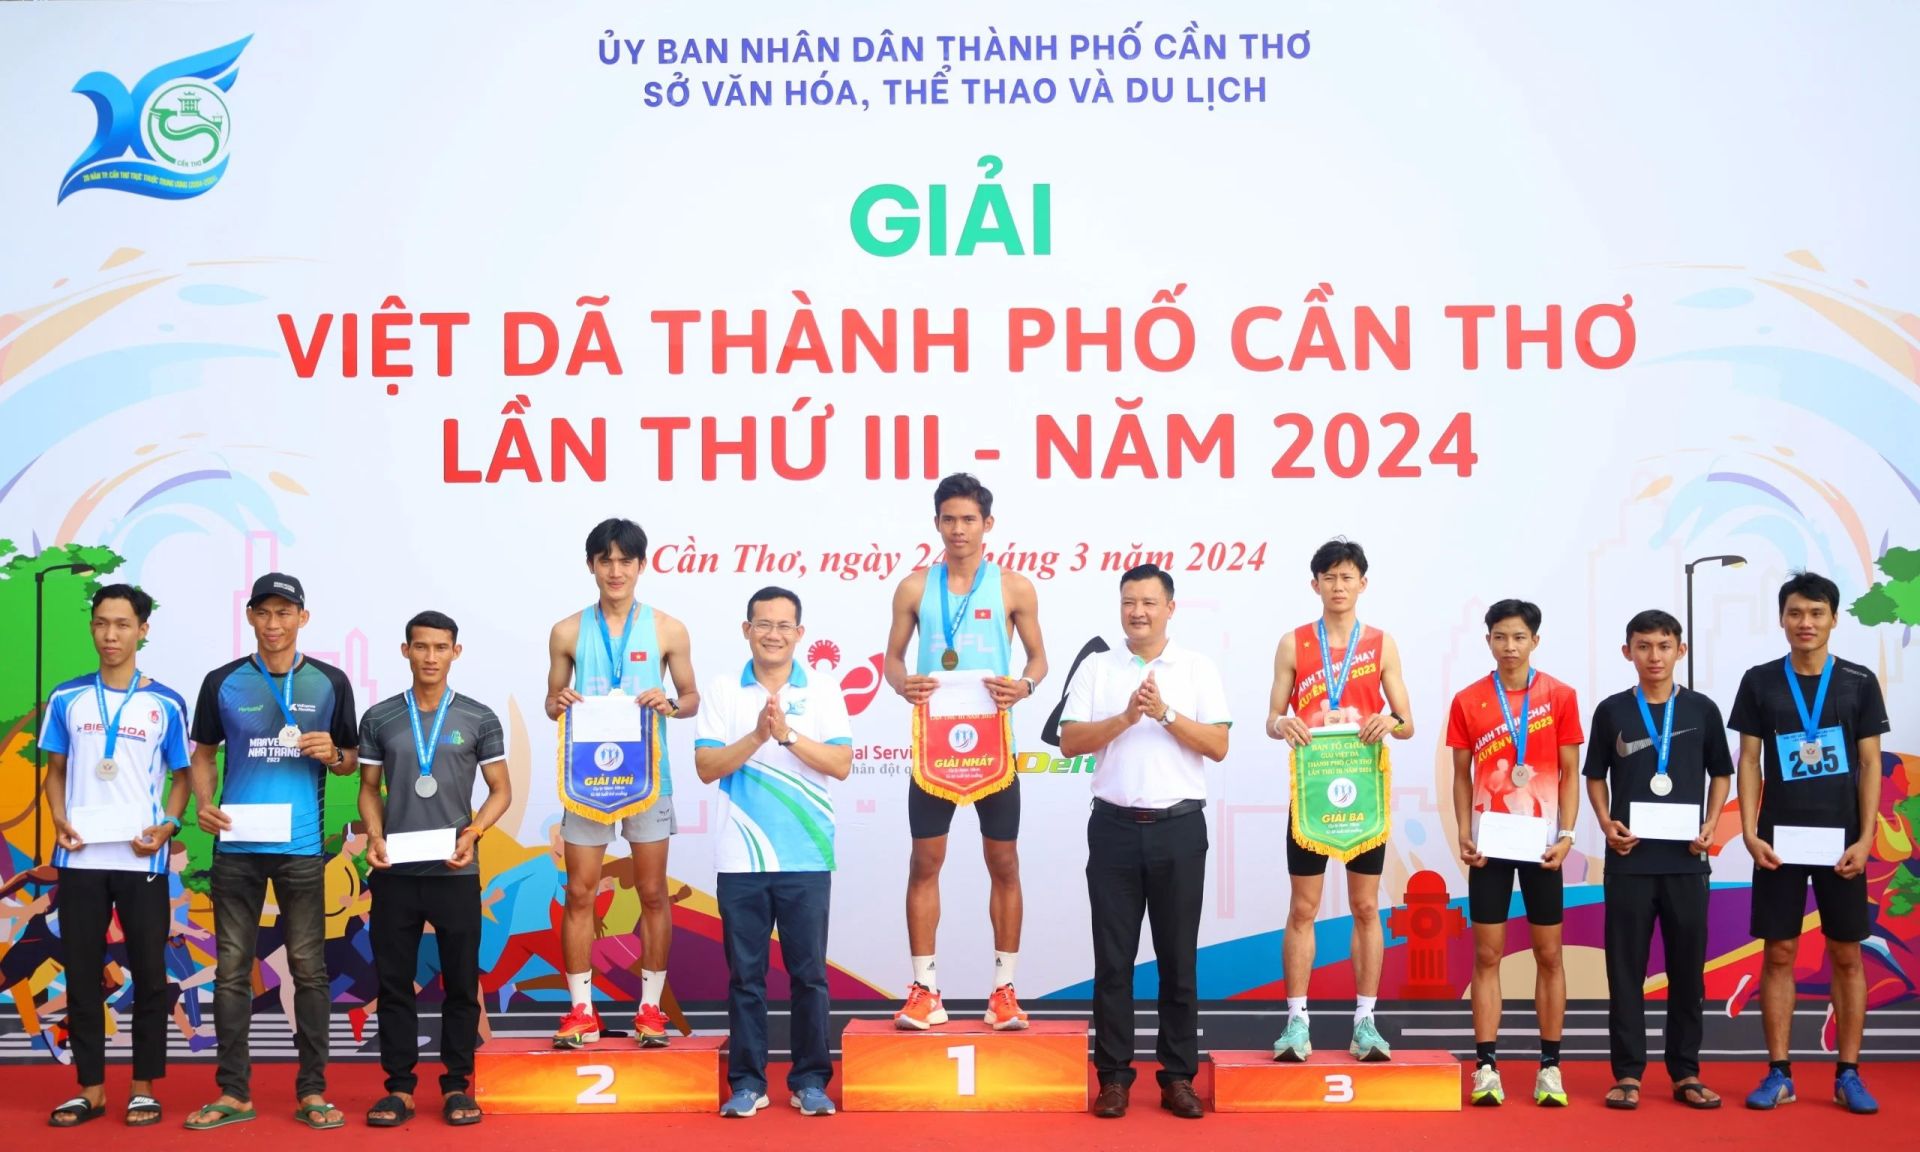 Mr Nguyen Ngoc Long - Deputy Director in charge of Can Tho National Sports Training Centre and Mr Nguyen Minh Tuan - Director of the Department of Culture, Sports and Tourism of Can Tho City awarded the men’s 10km race for ages 50 and under